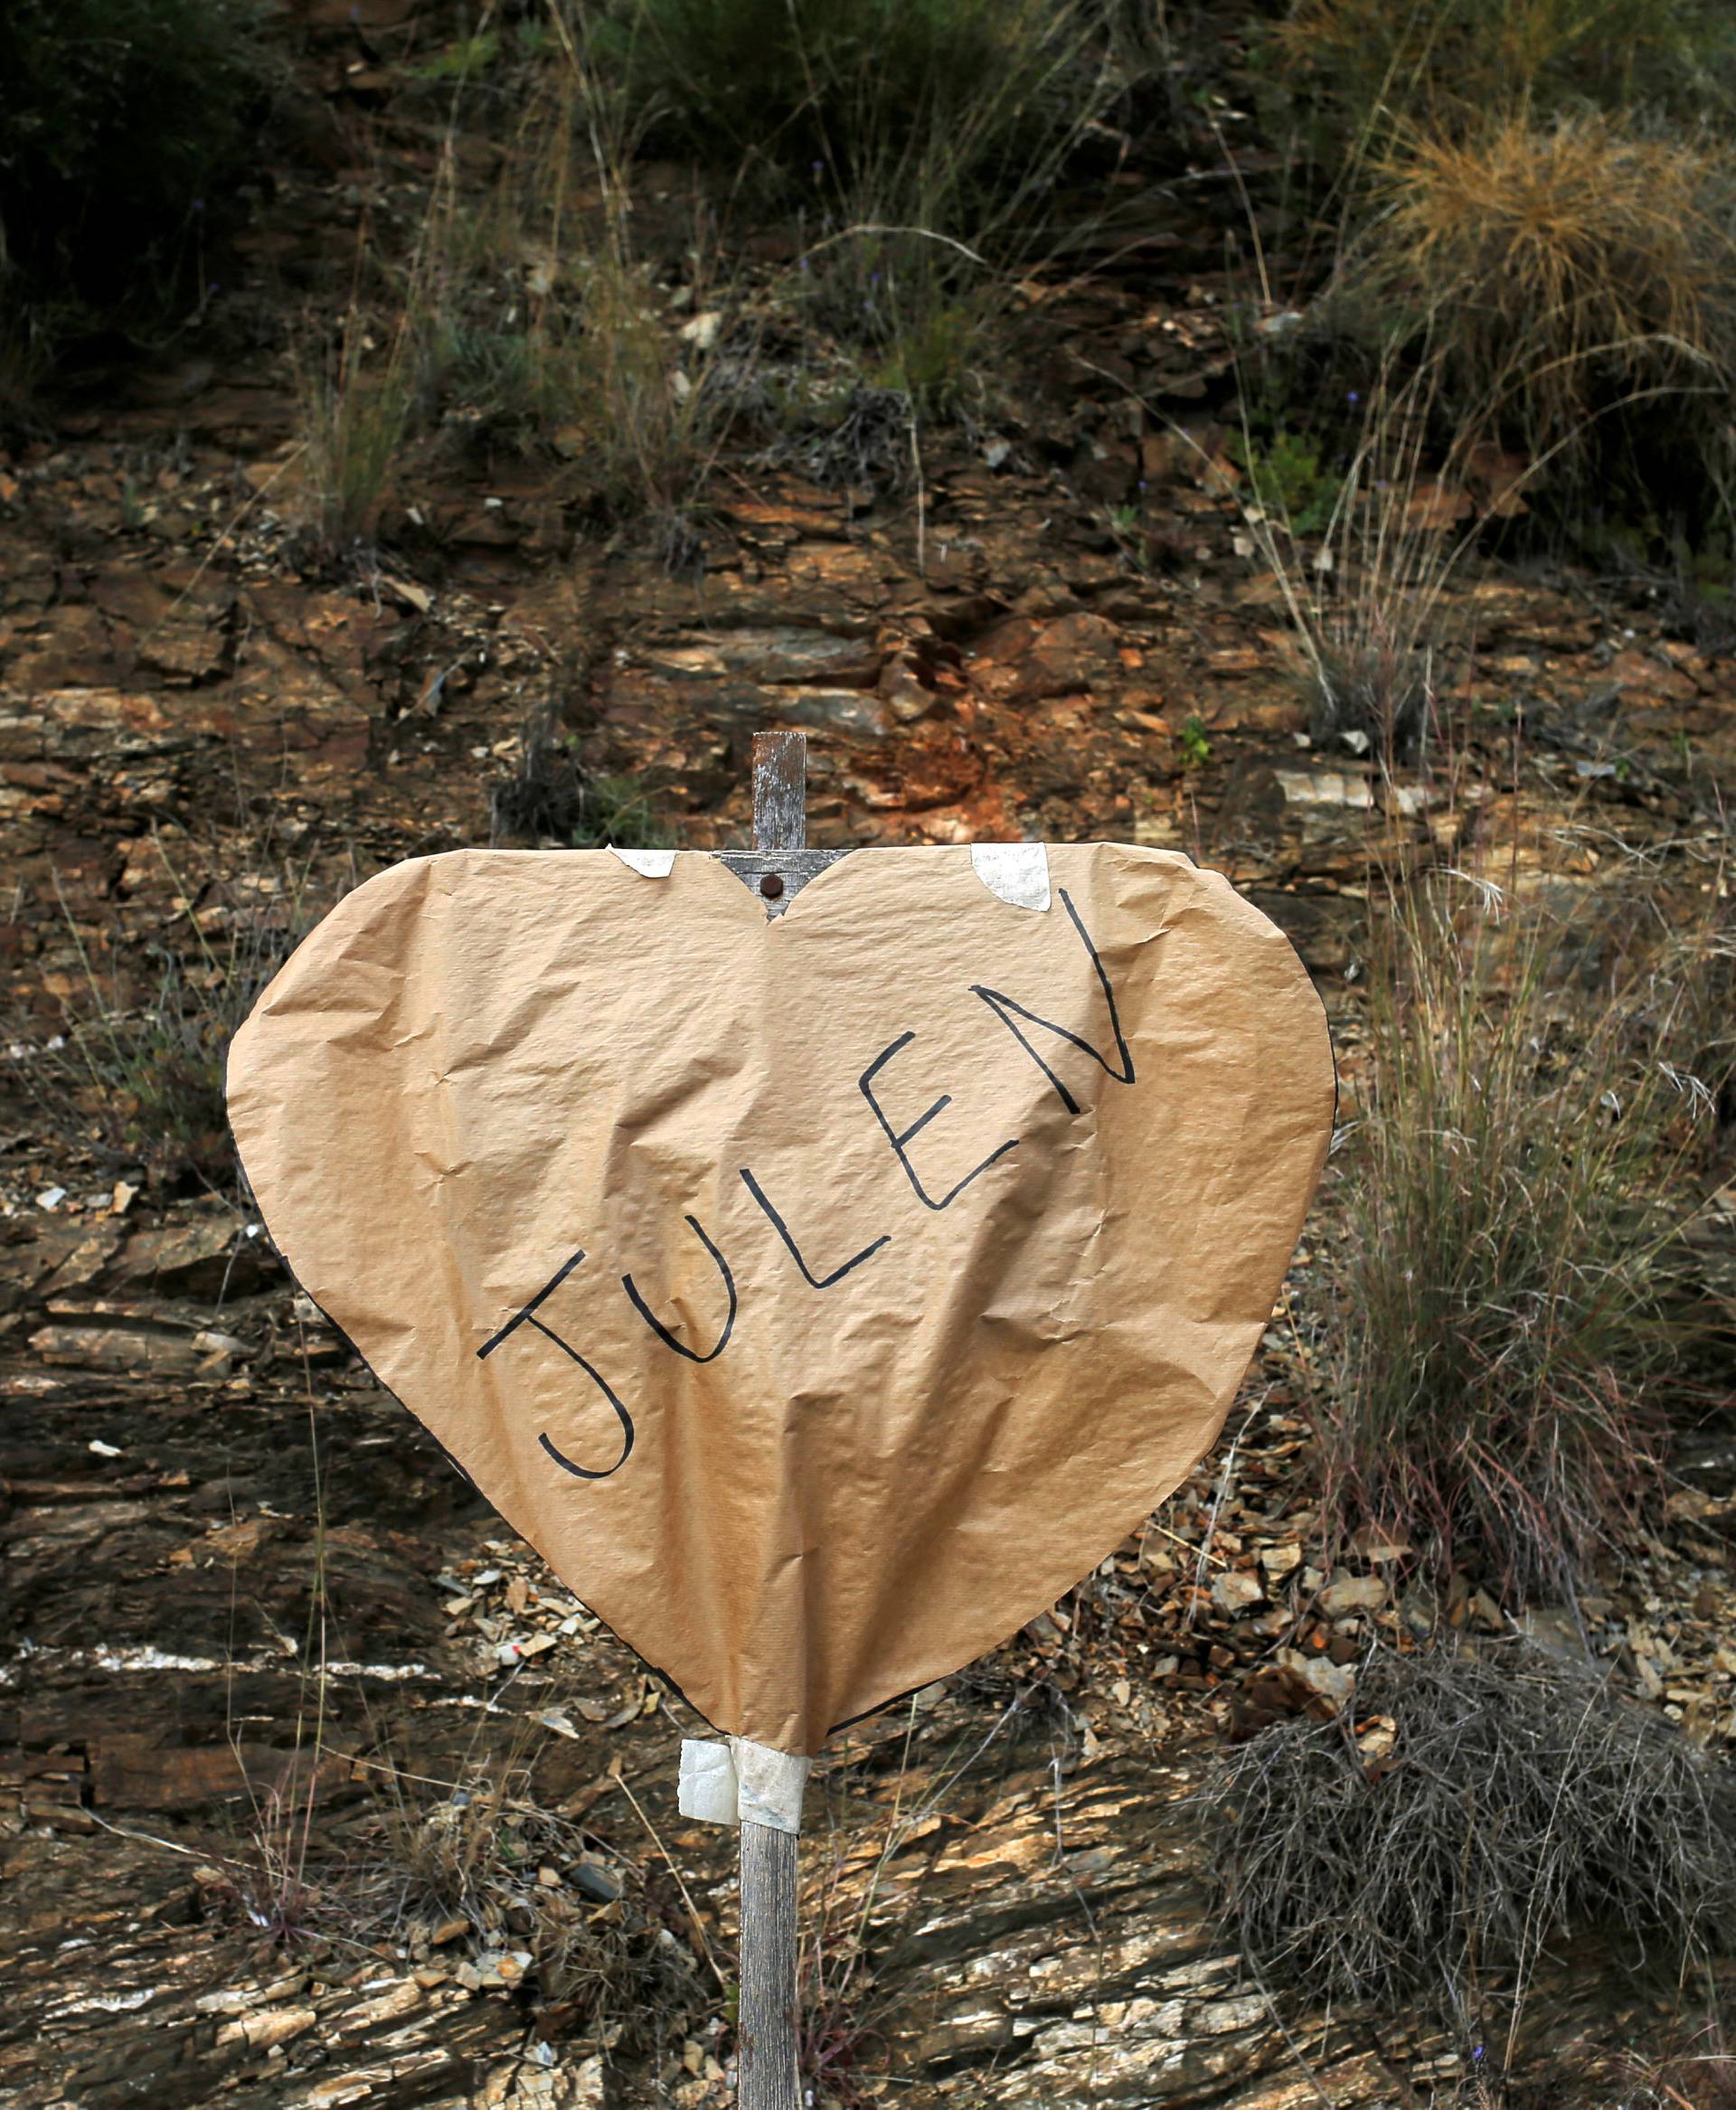 A banner in the shape of a heart is seen at the area where Julen, a Spanish two-year-old boy fell into a deep well seven days ago when the family was taking a stroll through a private estate, in Totalan